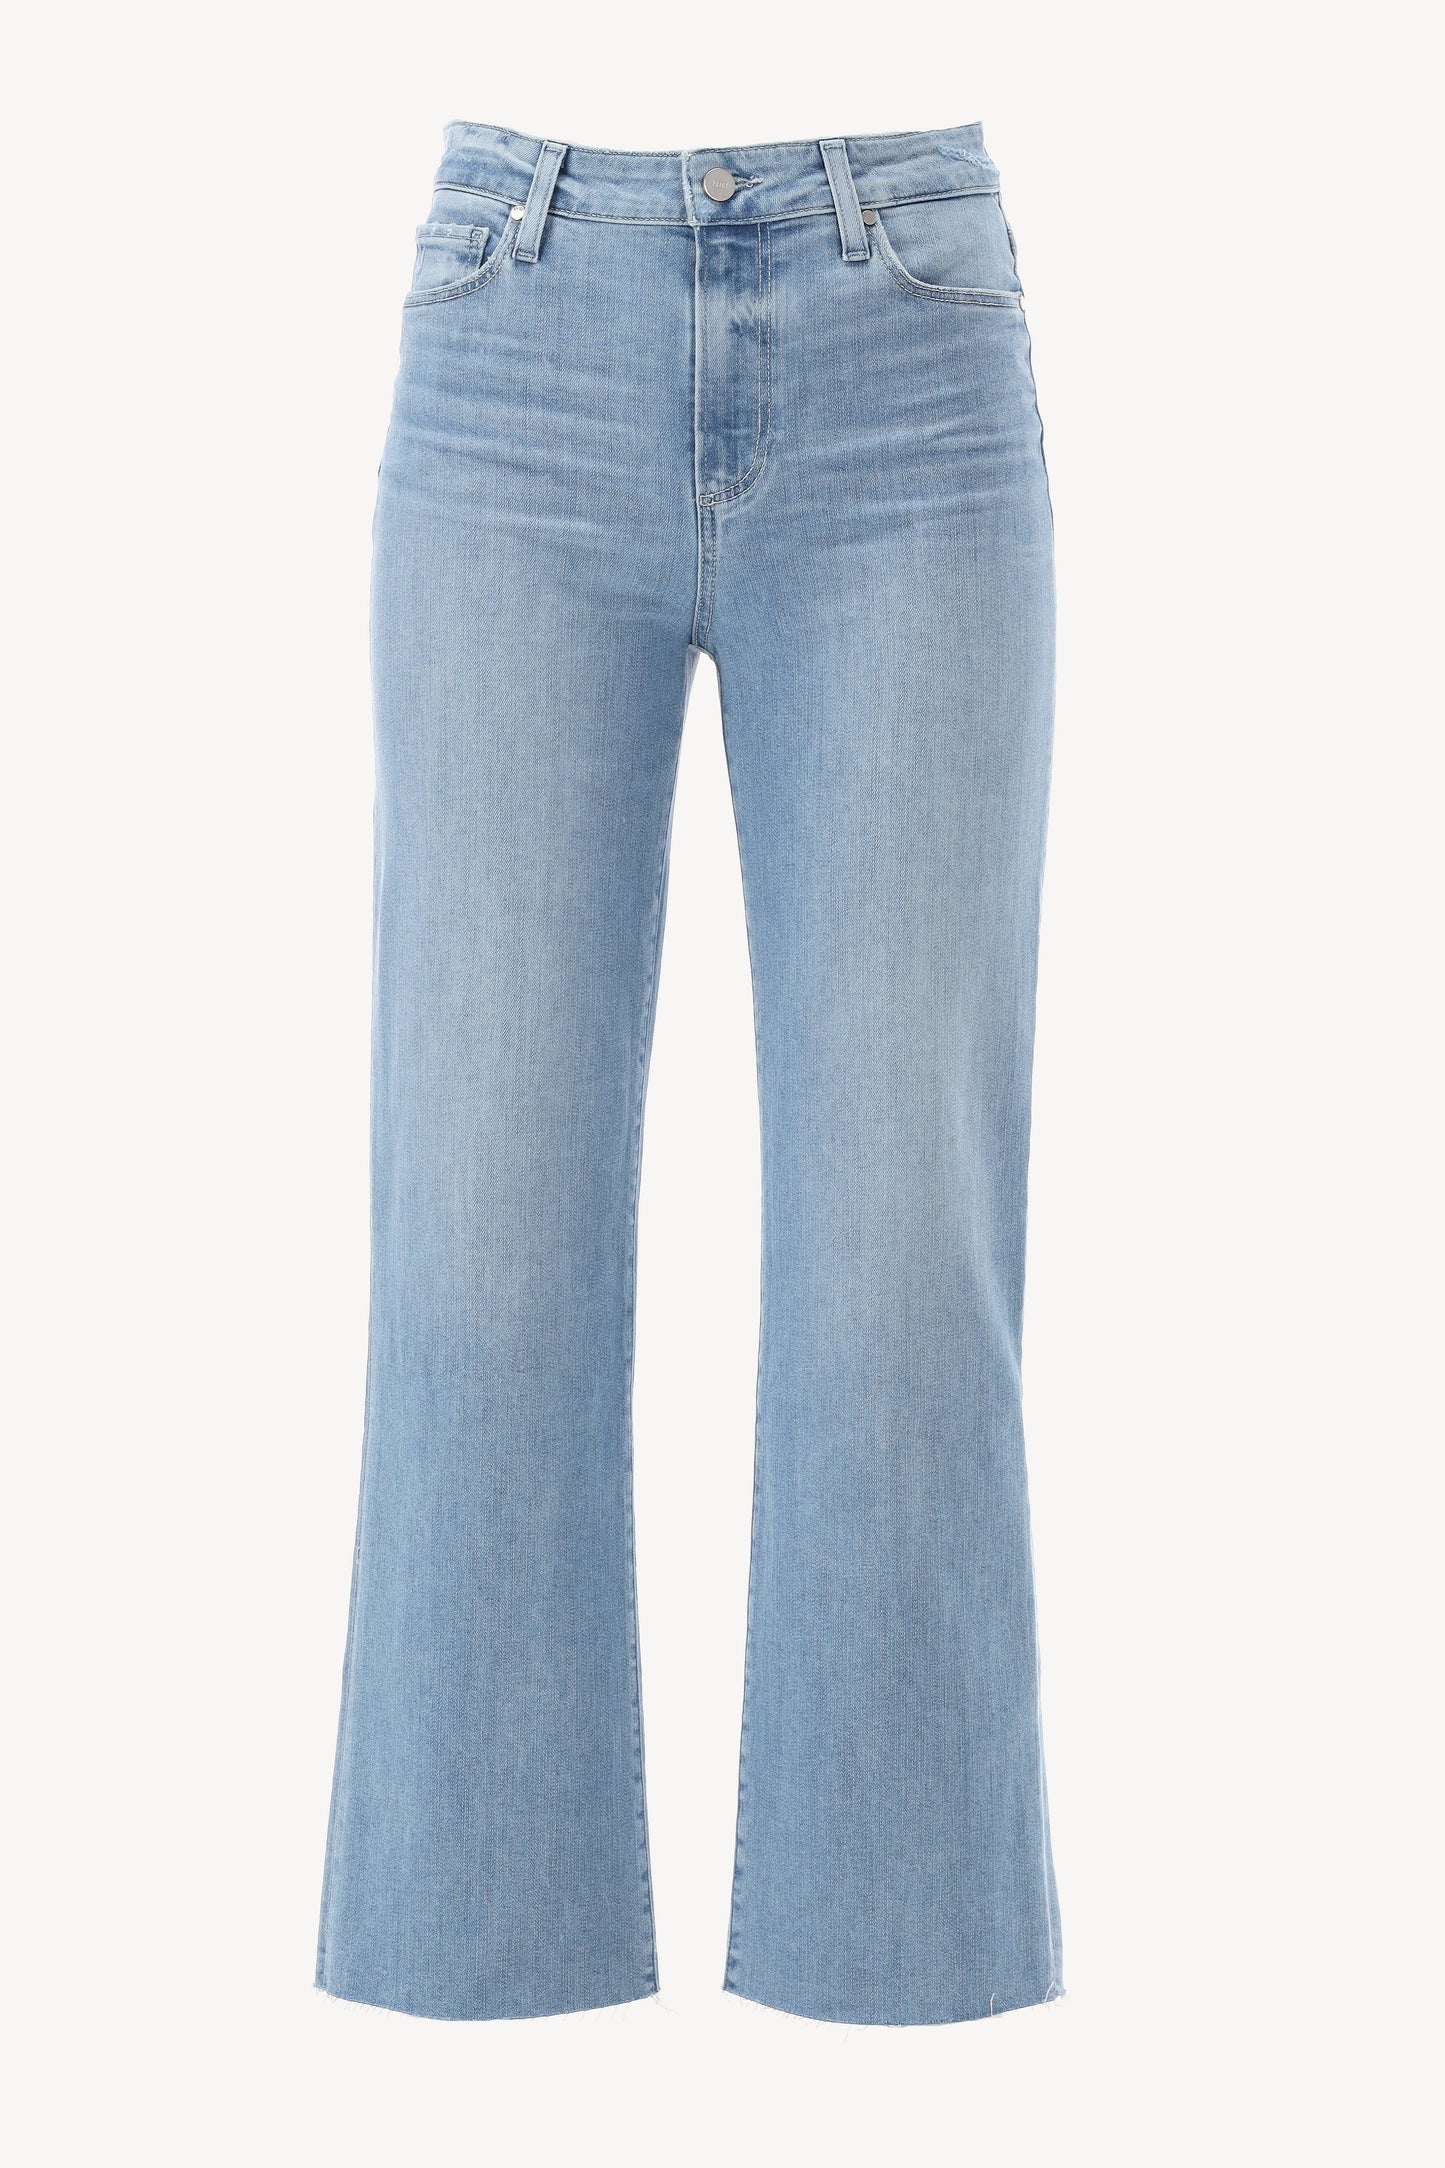 Jeans Relaxed Colette Raw Hem in JamaPaige - Anita Hass